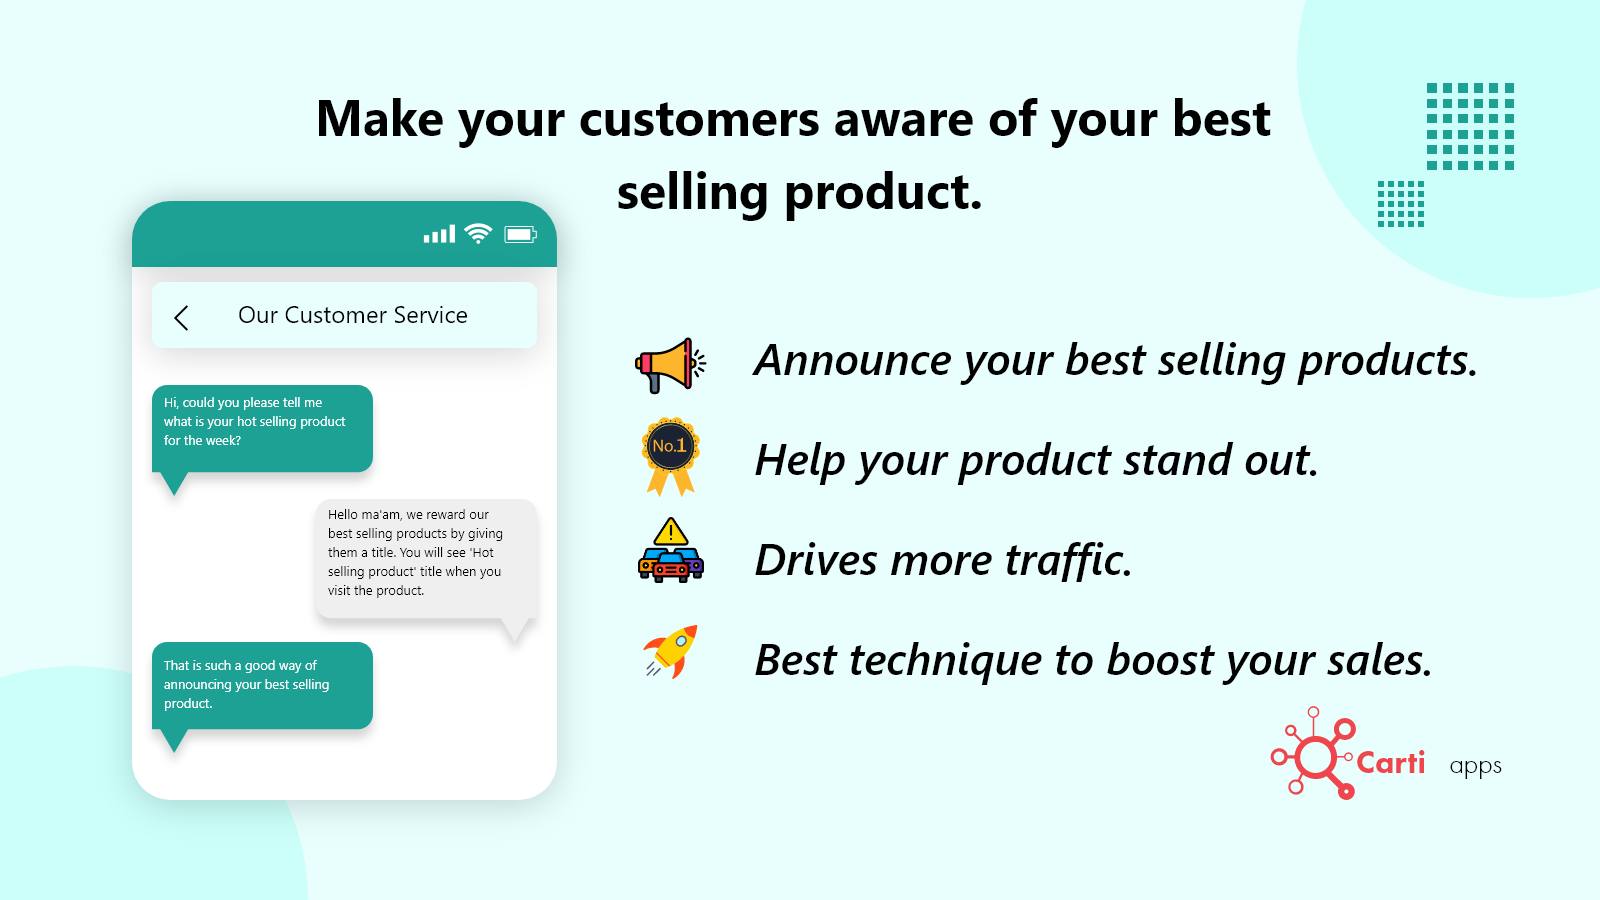 Make your customers aware of the best selling product.